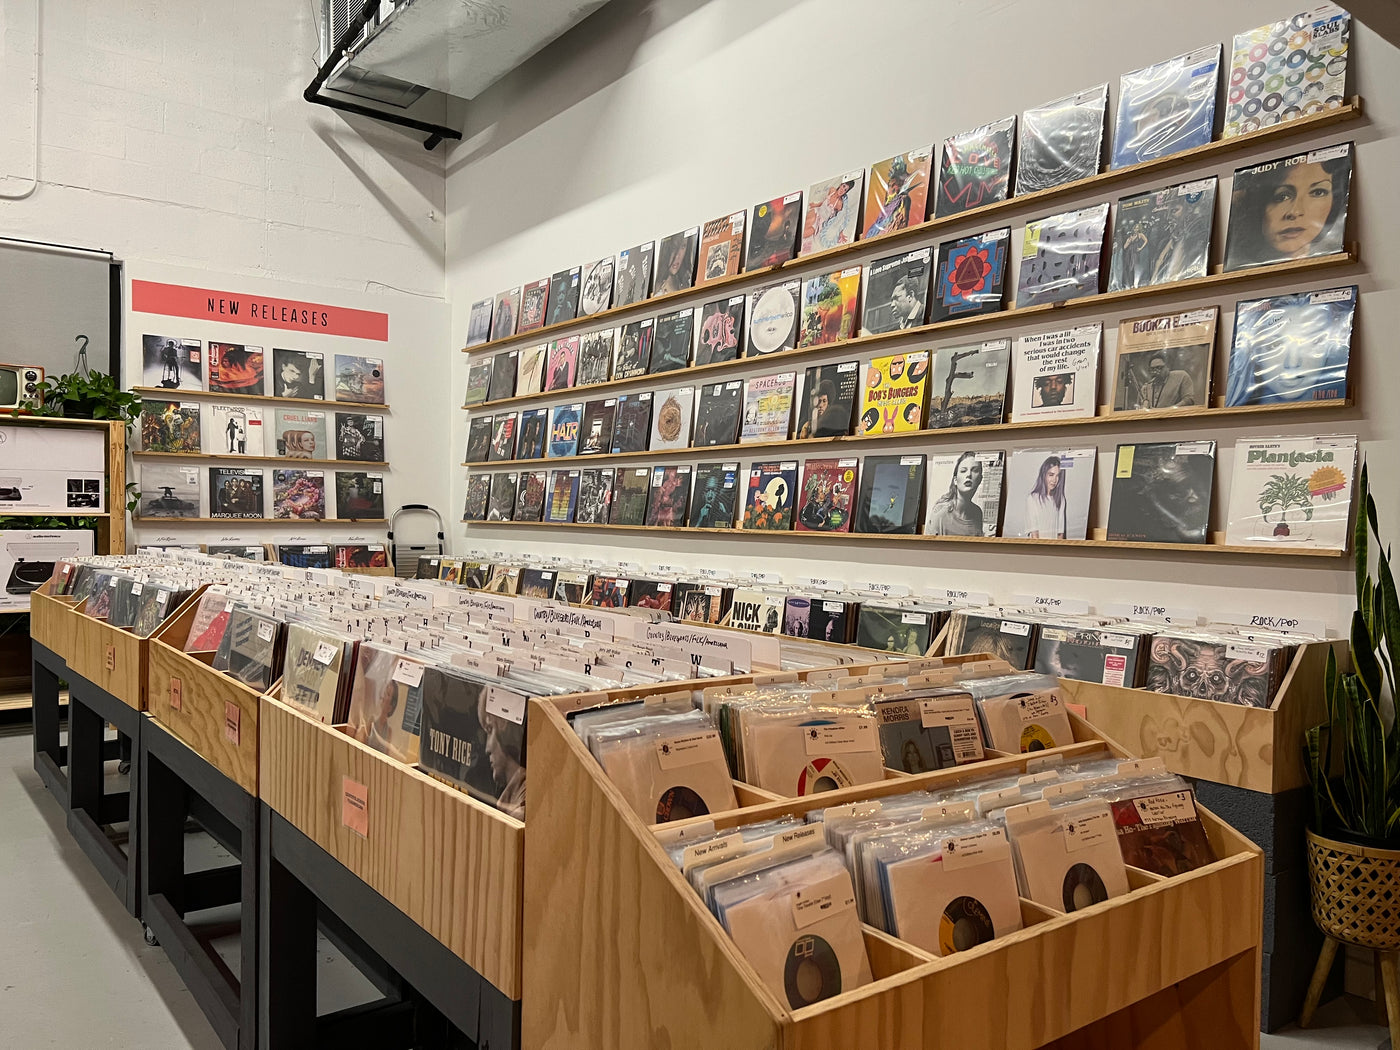 View from the back of the shop facing the front right side. Features 2 rows of record bins, a 7" vinyl section, the large featured record wall, and the New Releases section.